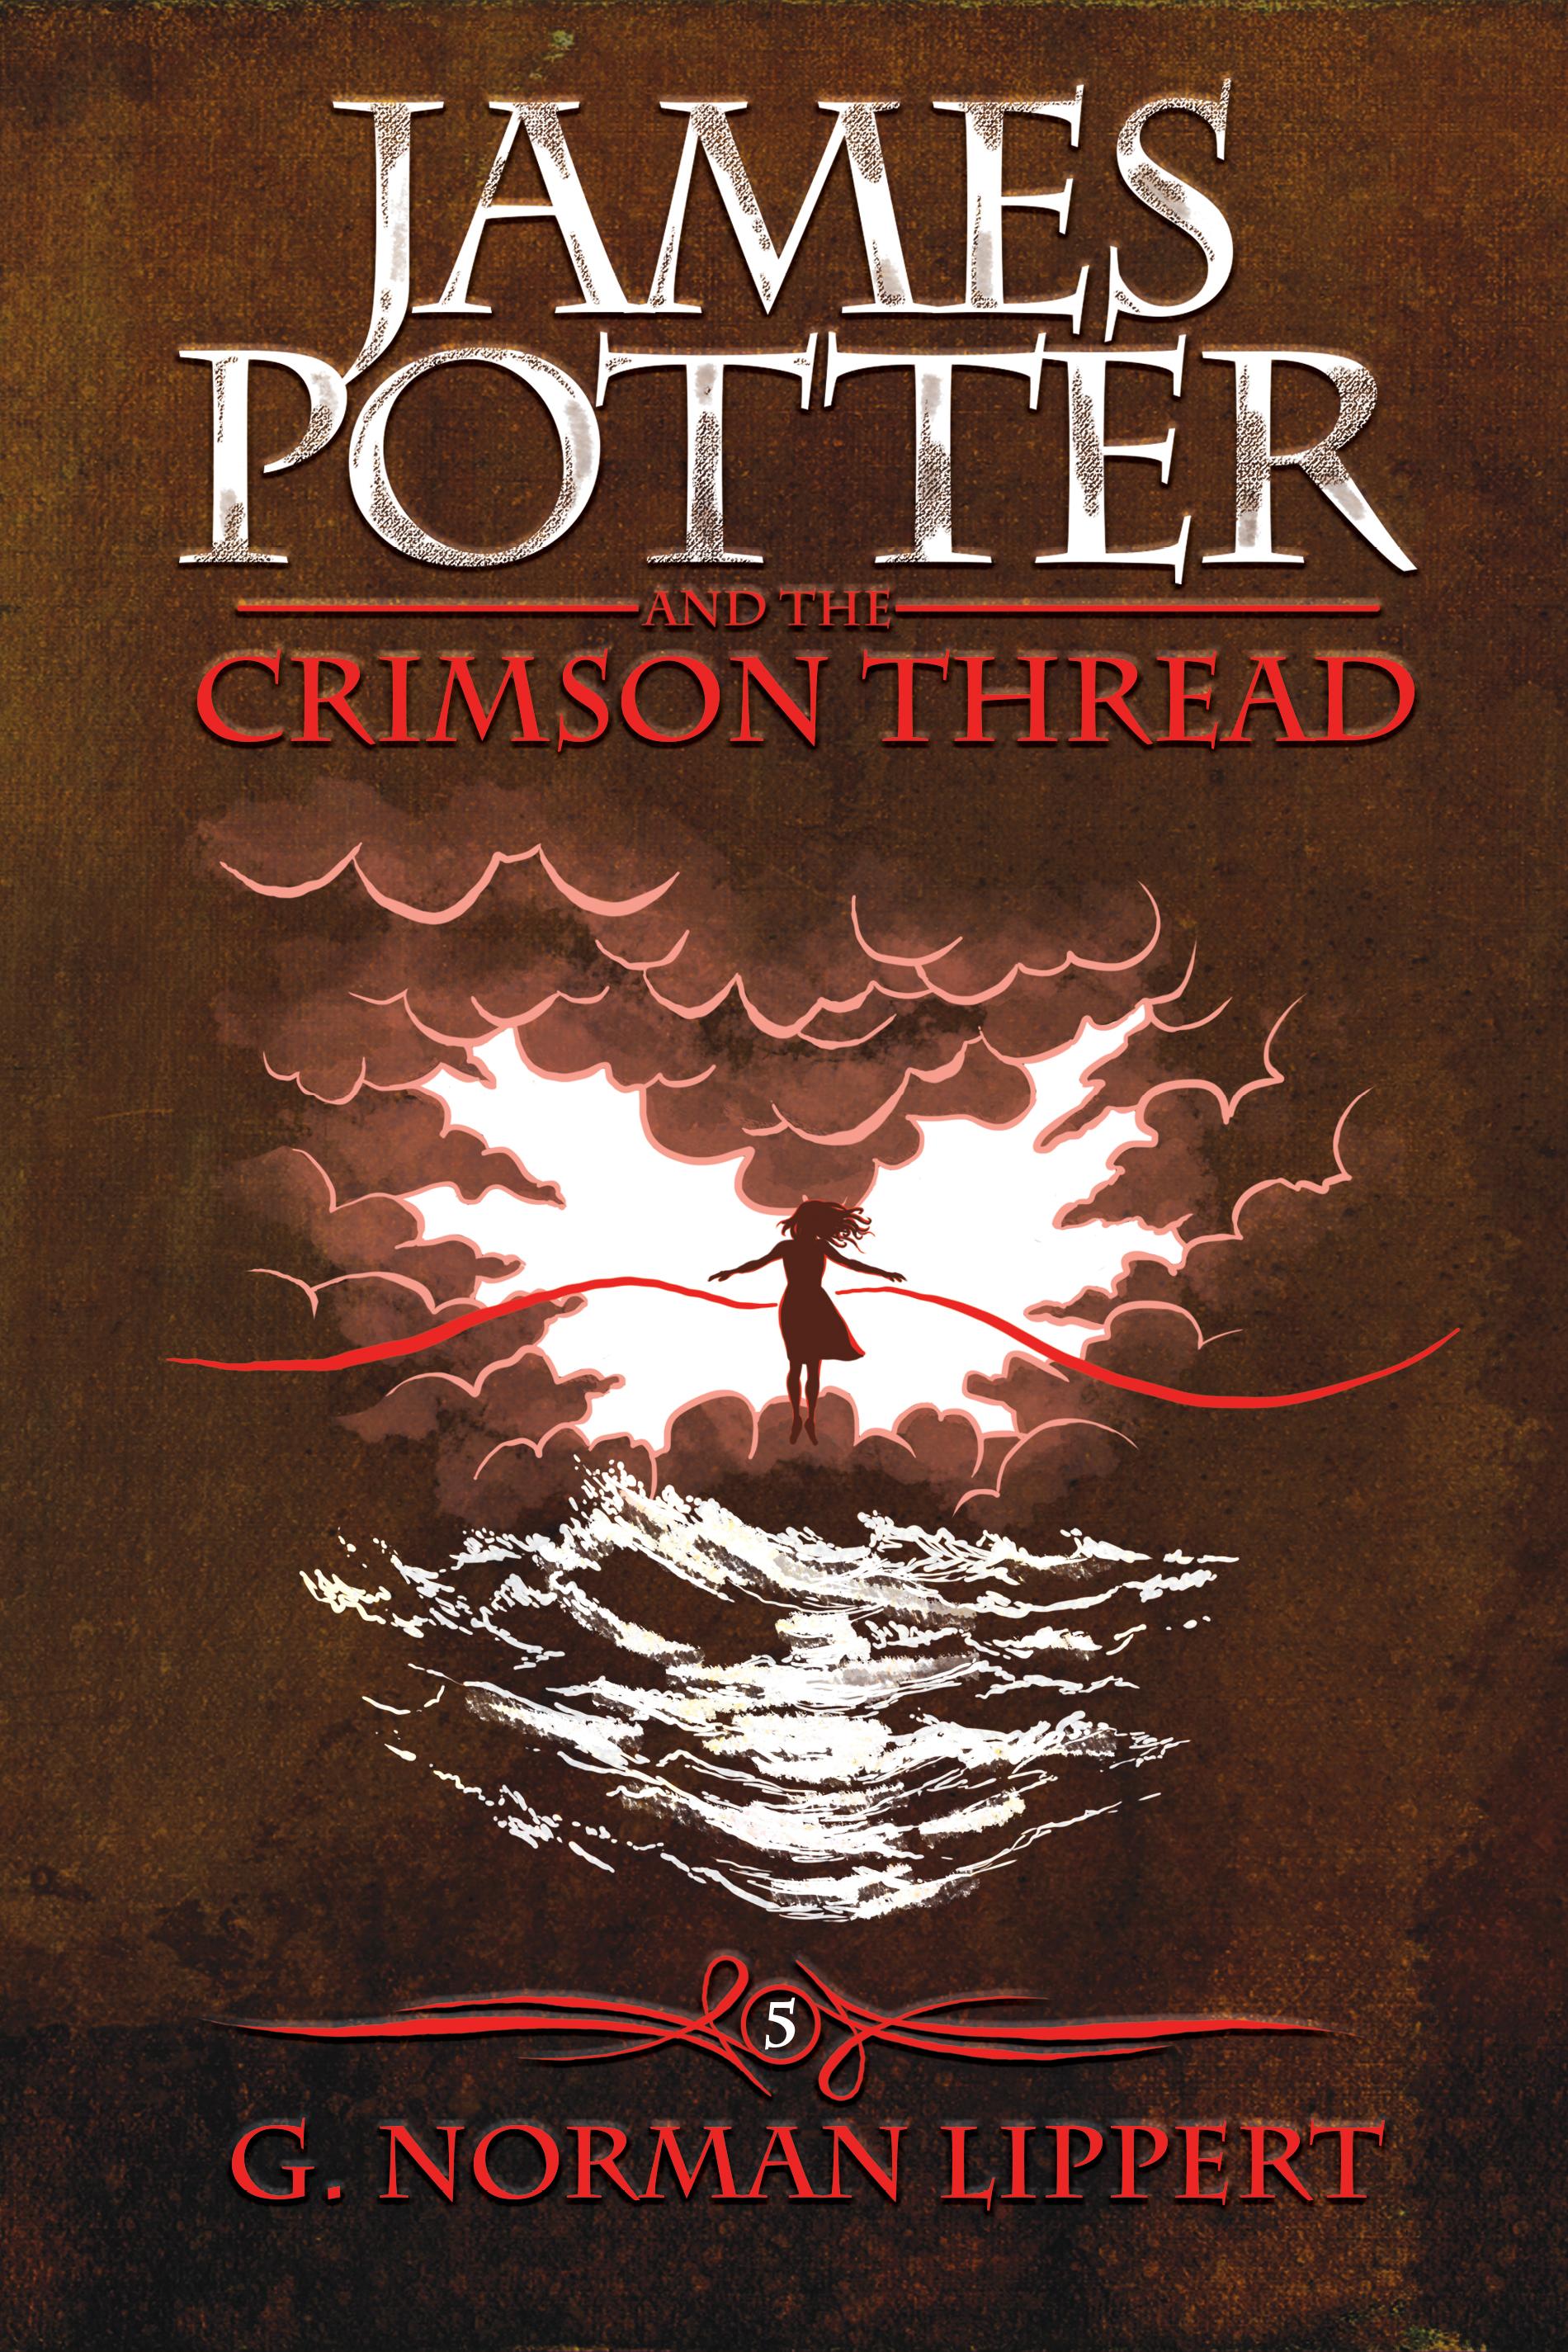 James Potter and the Crimson Thread